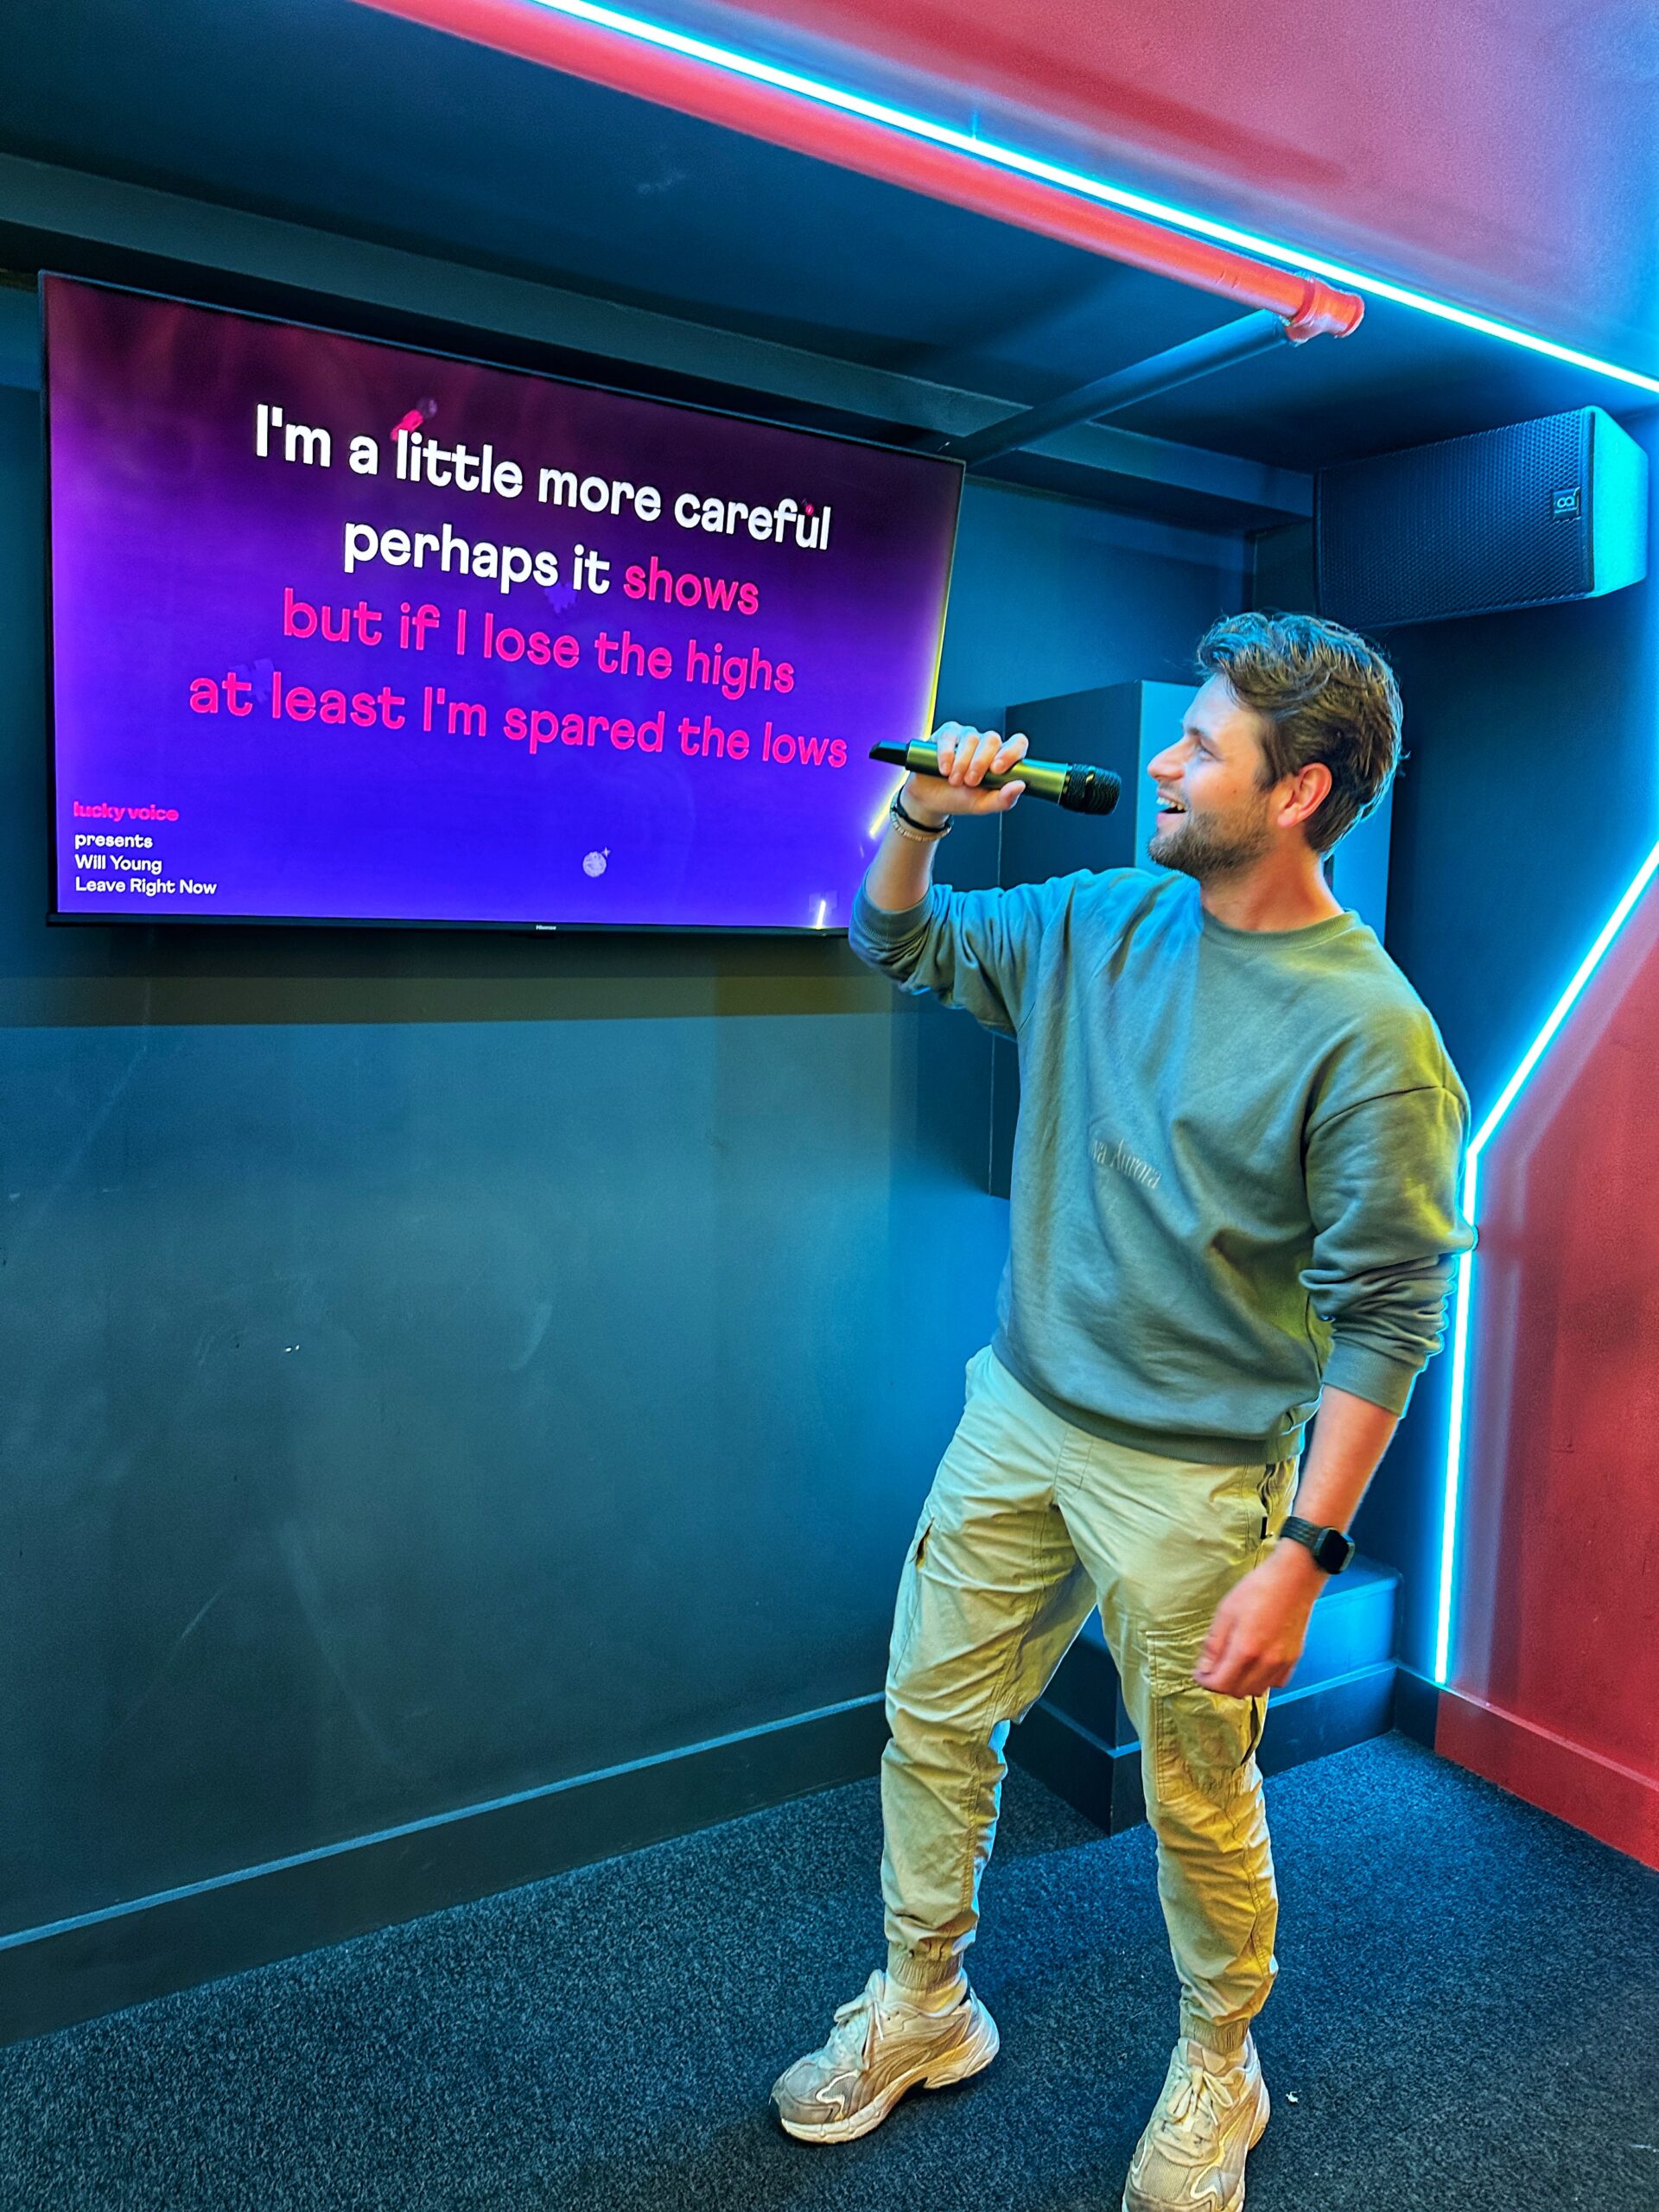 There are private karaoke rooms you can book out